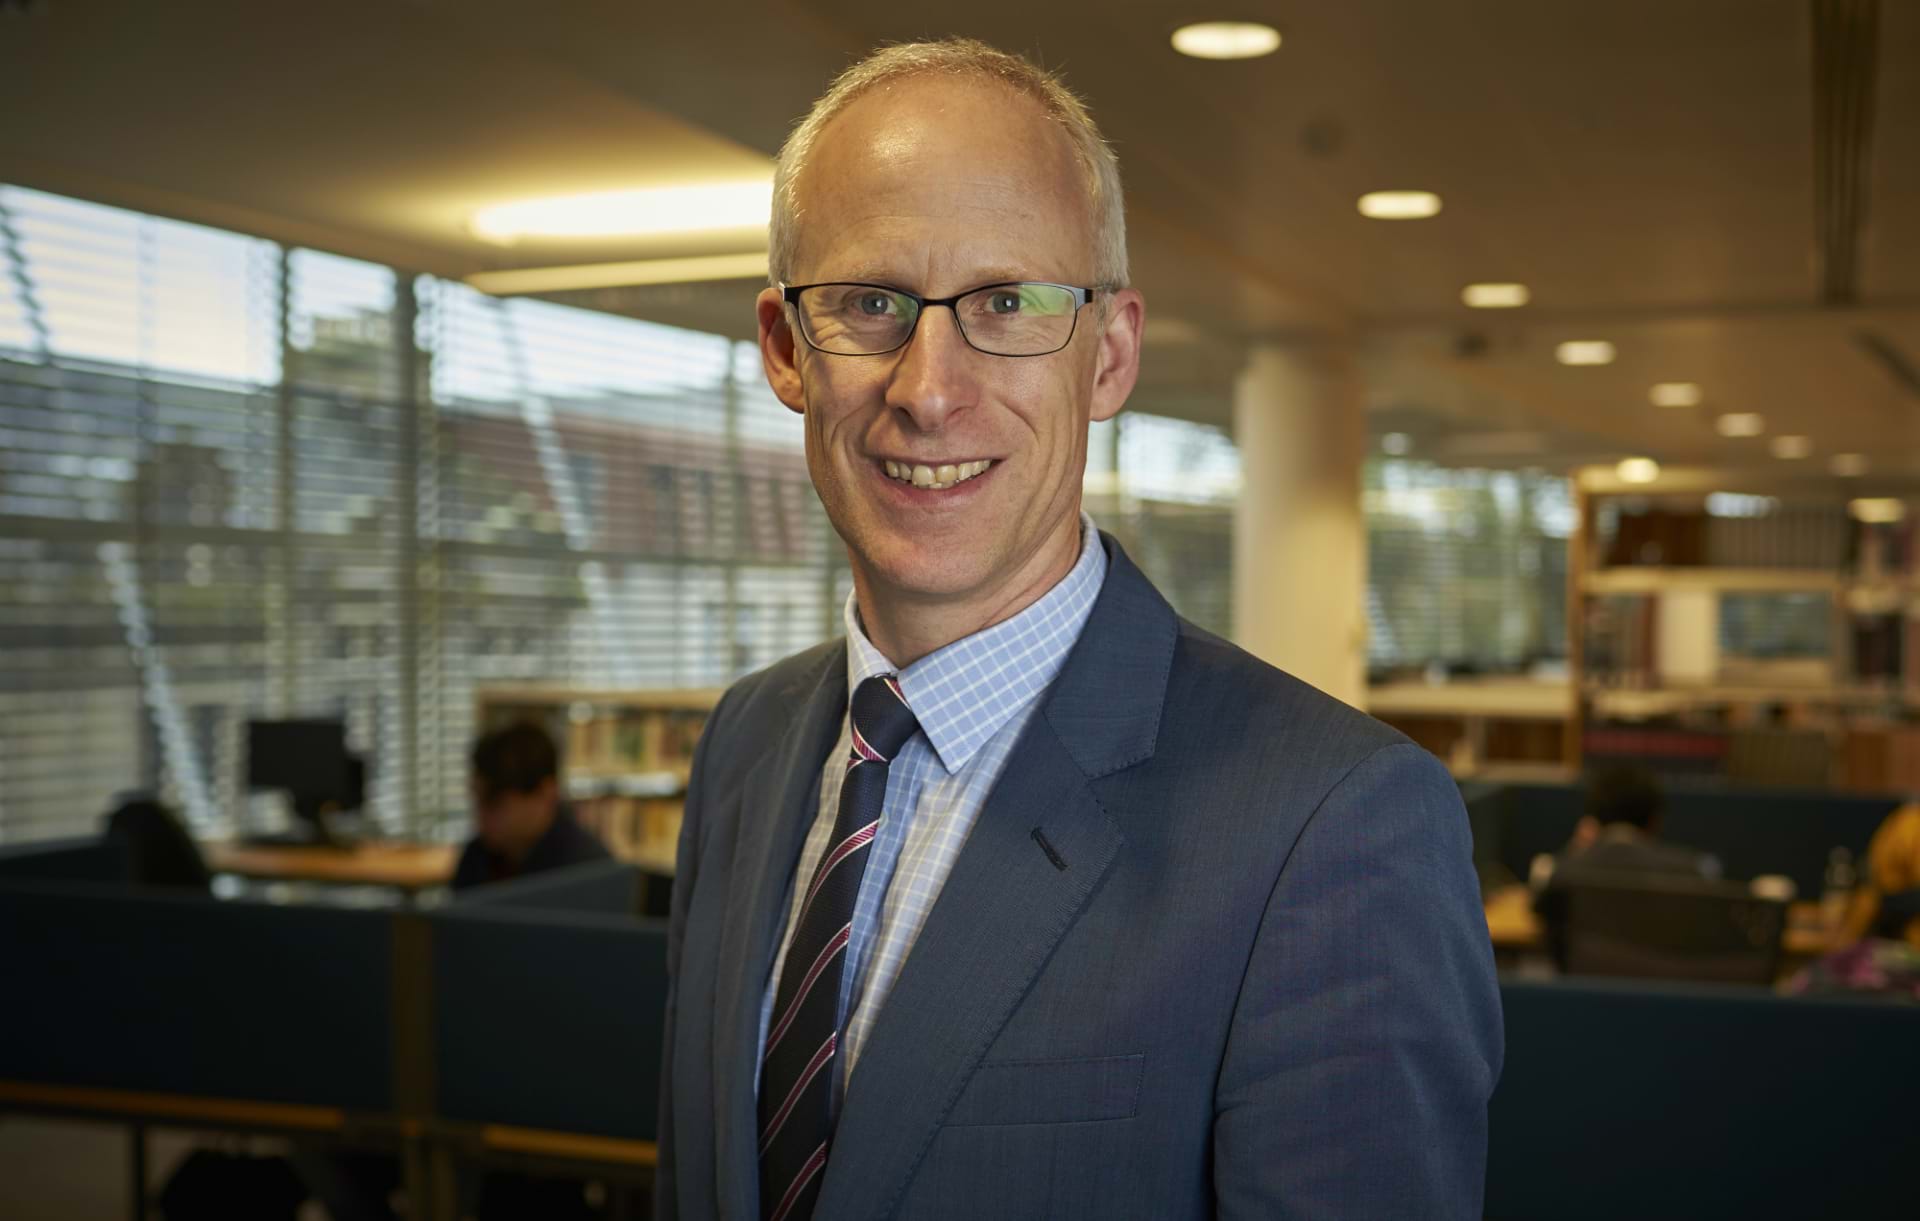 Alastair Robertson, Director of Teaching and Learning Enhancement at Abertay University